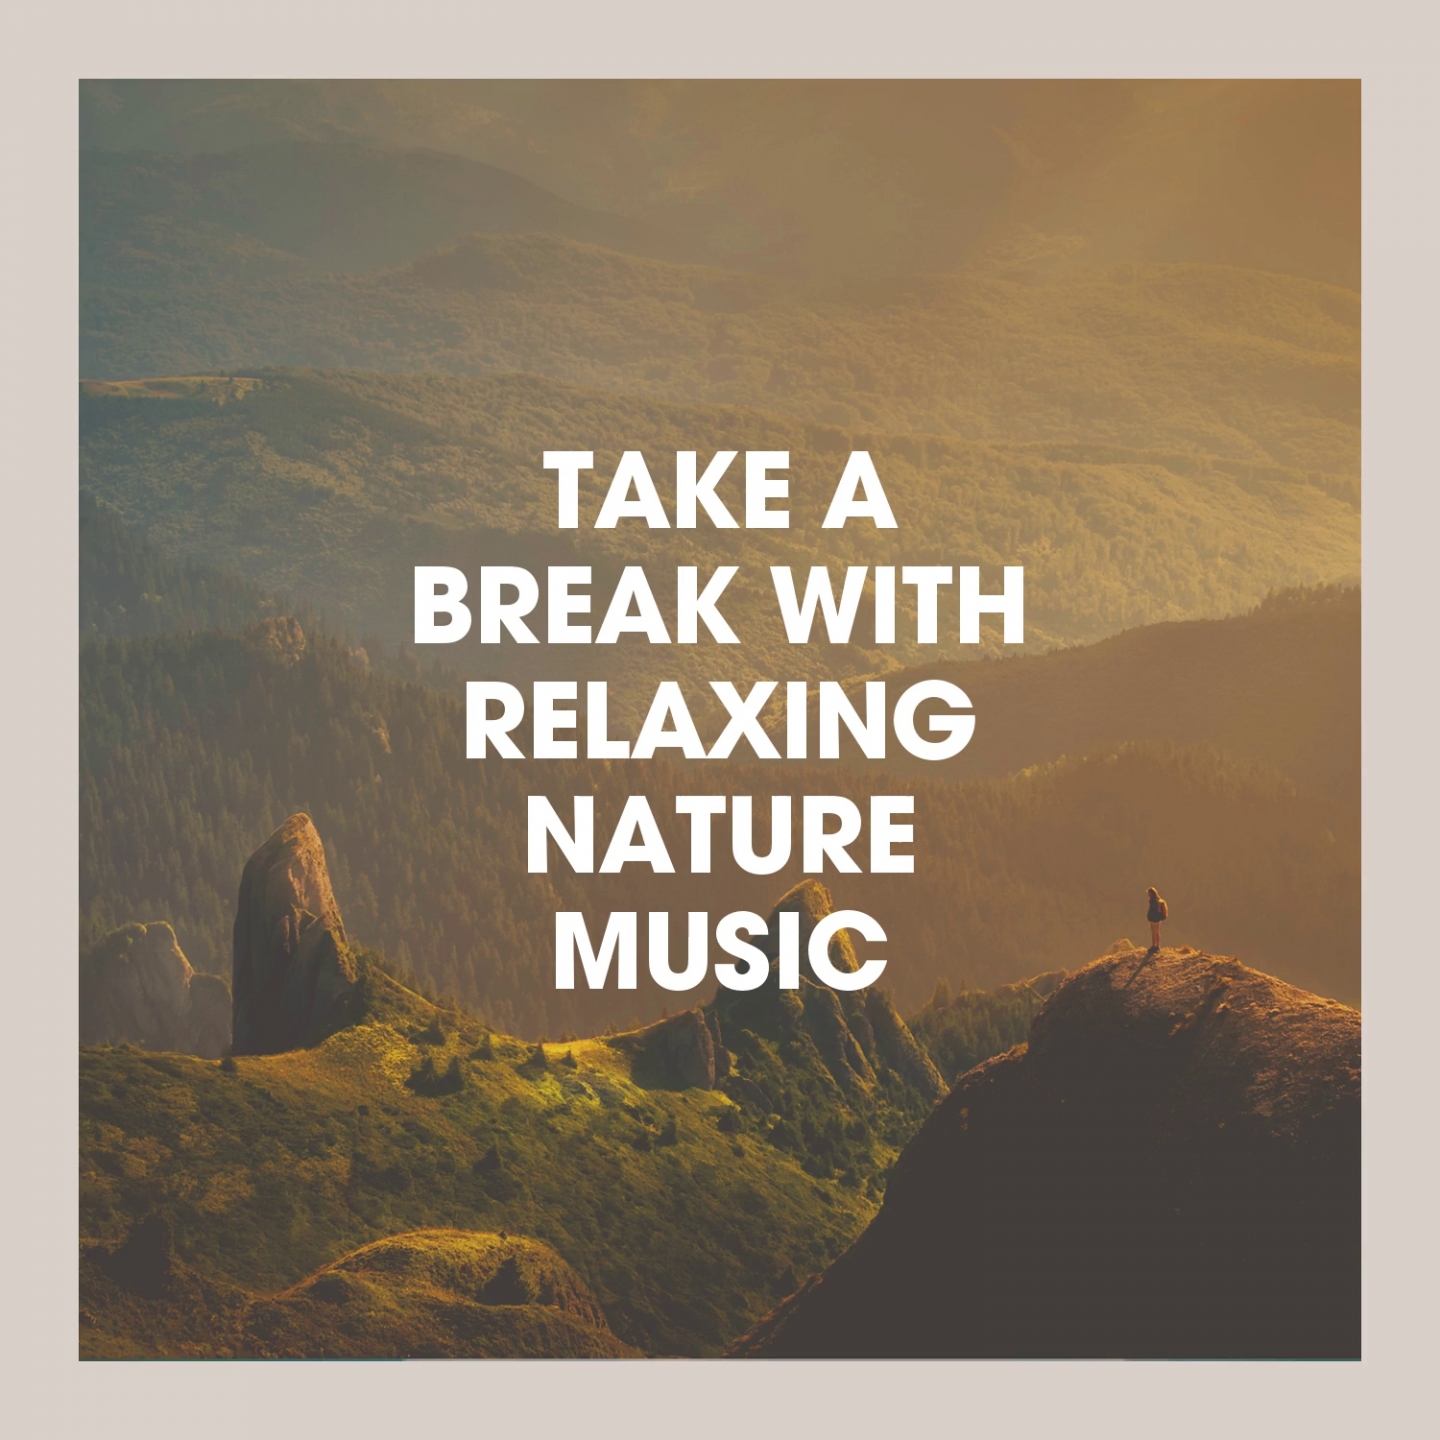 Take a Break With Relaxing Nature Music